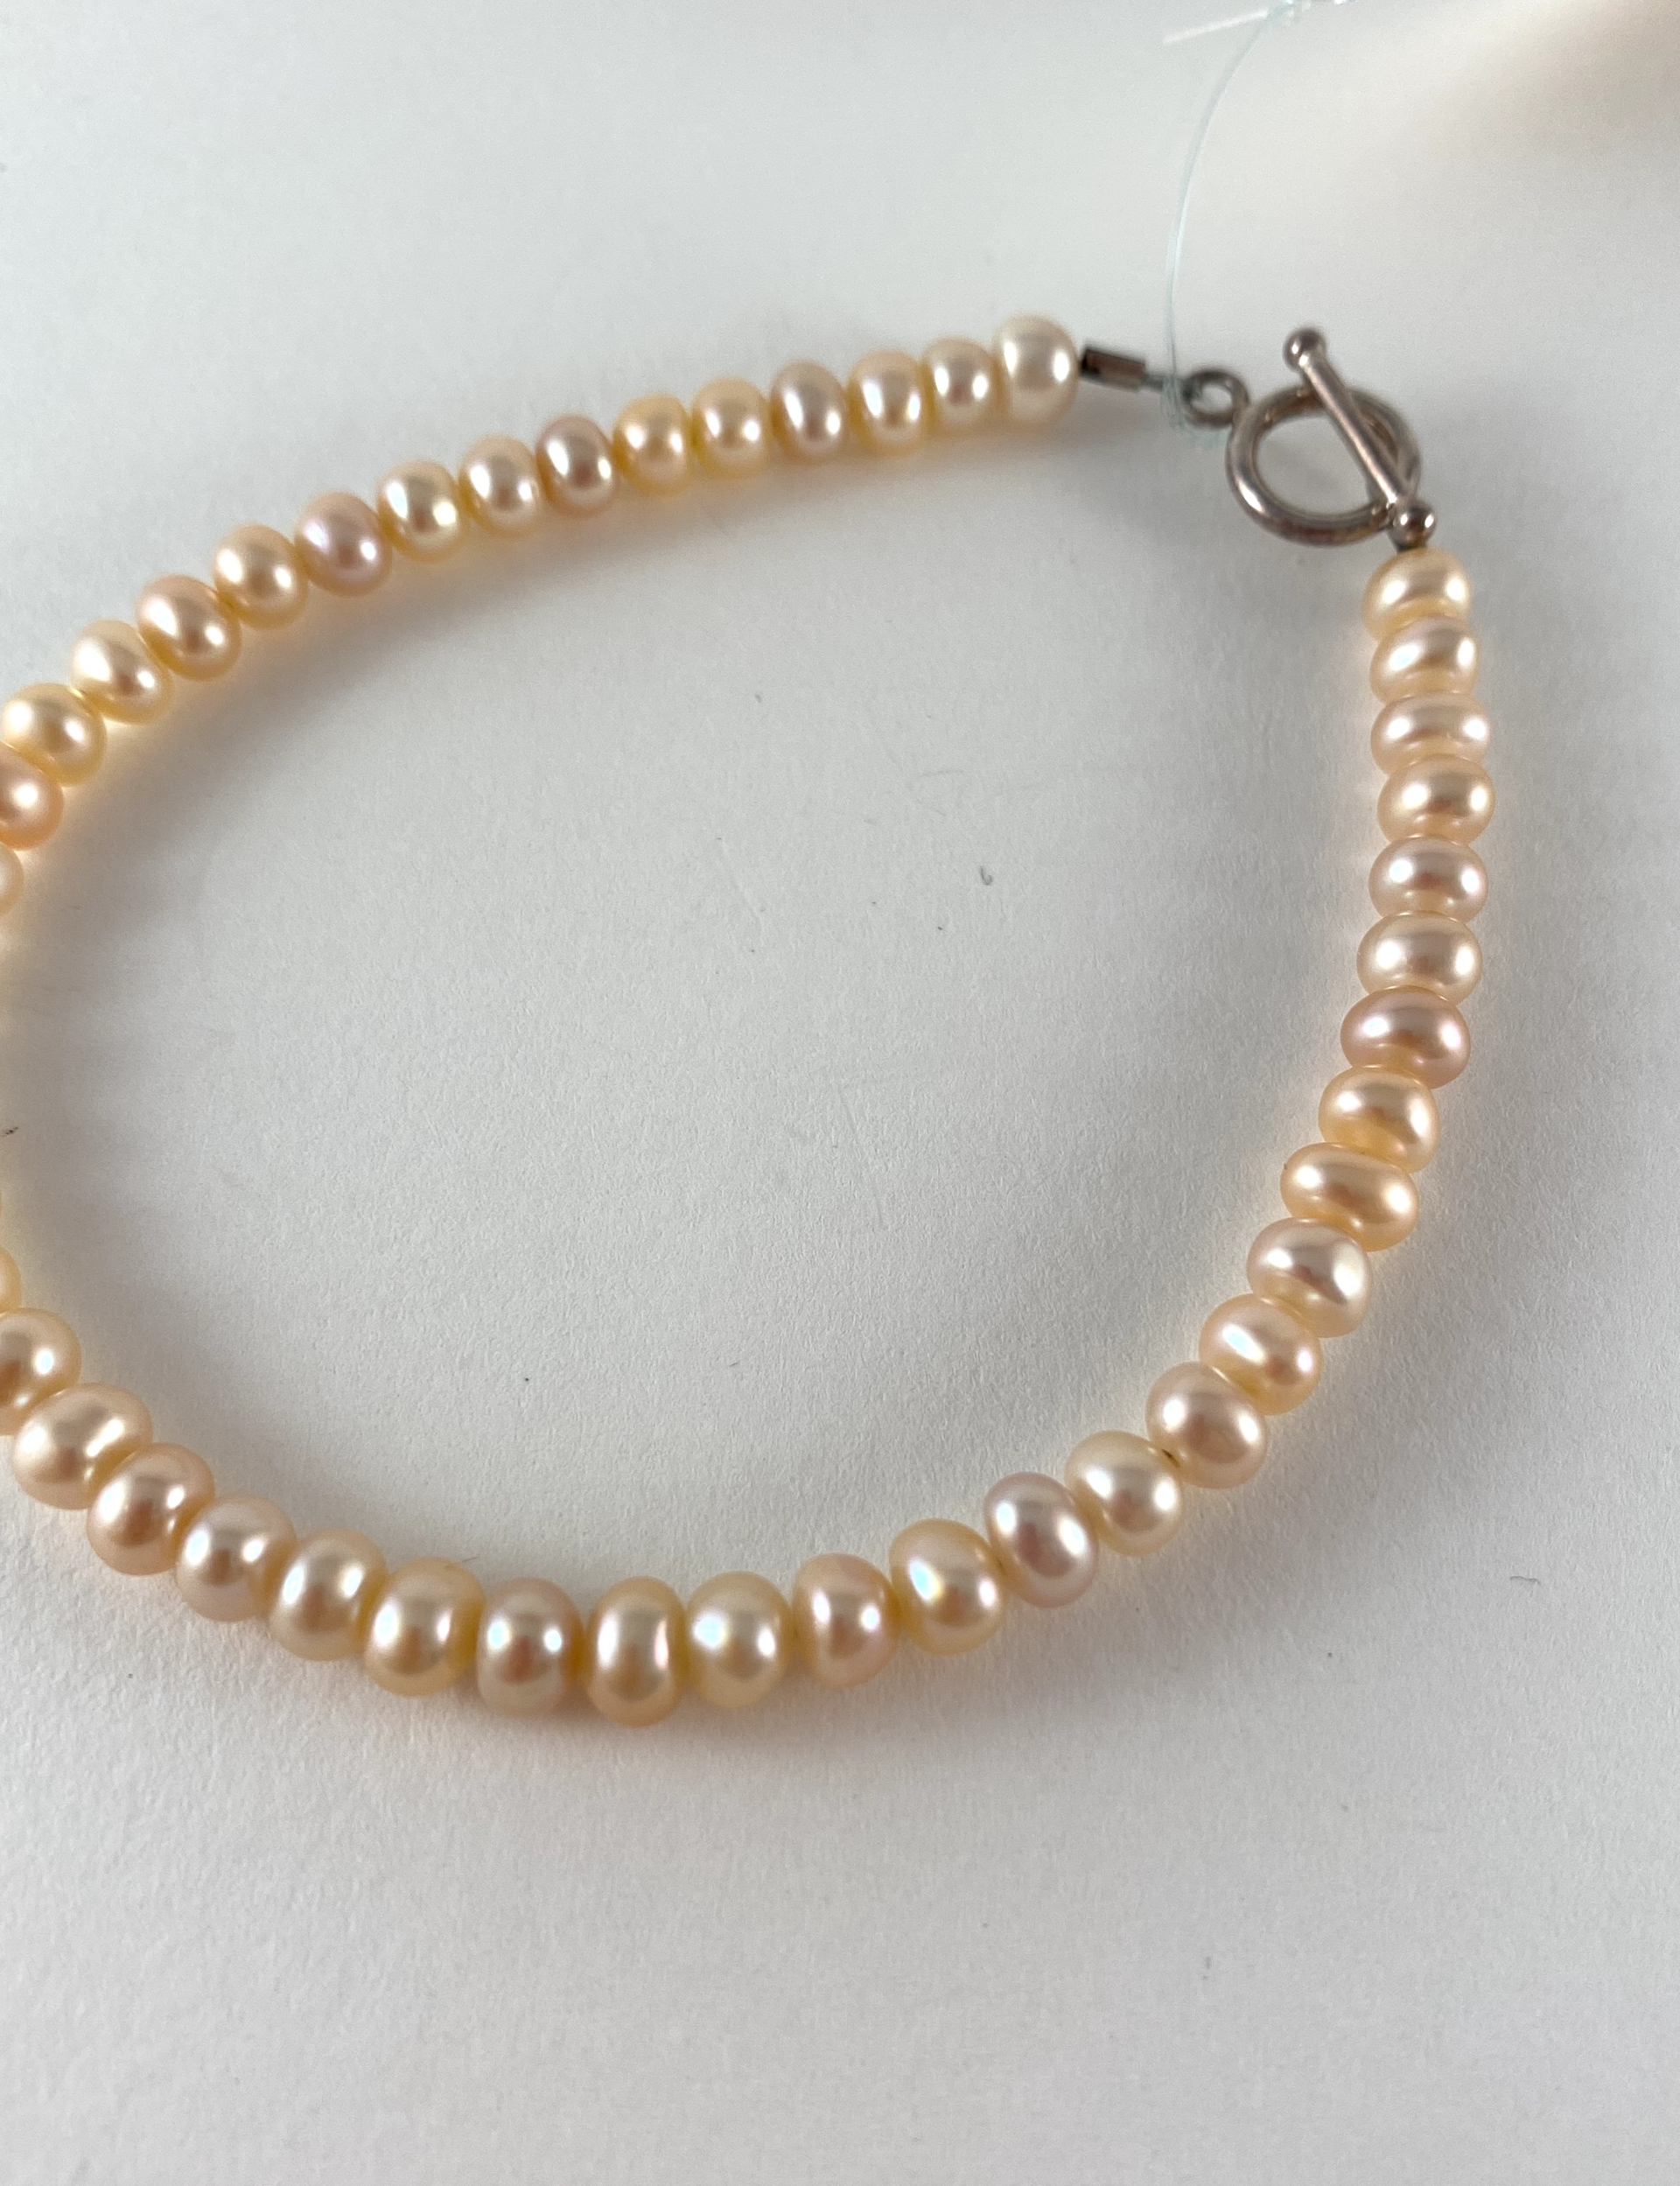 Peach Button Pearl Bracelet, toggle clasp P6 by Nance Trueworthy